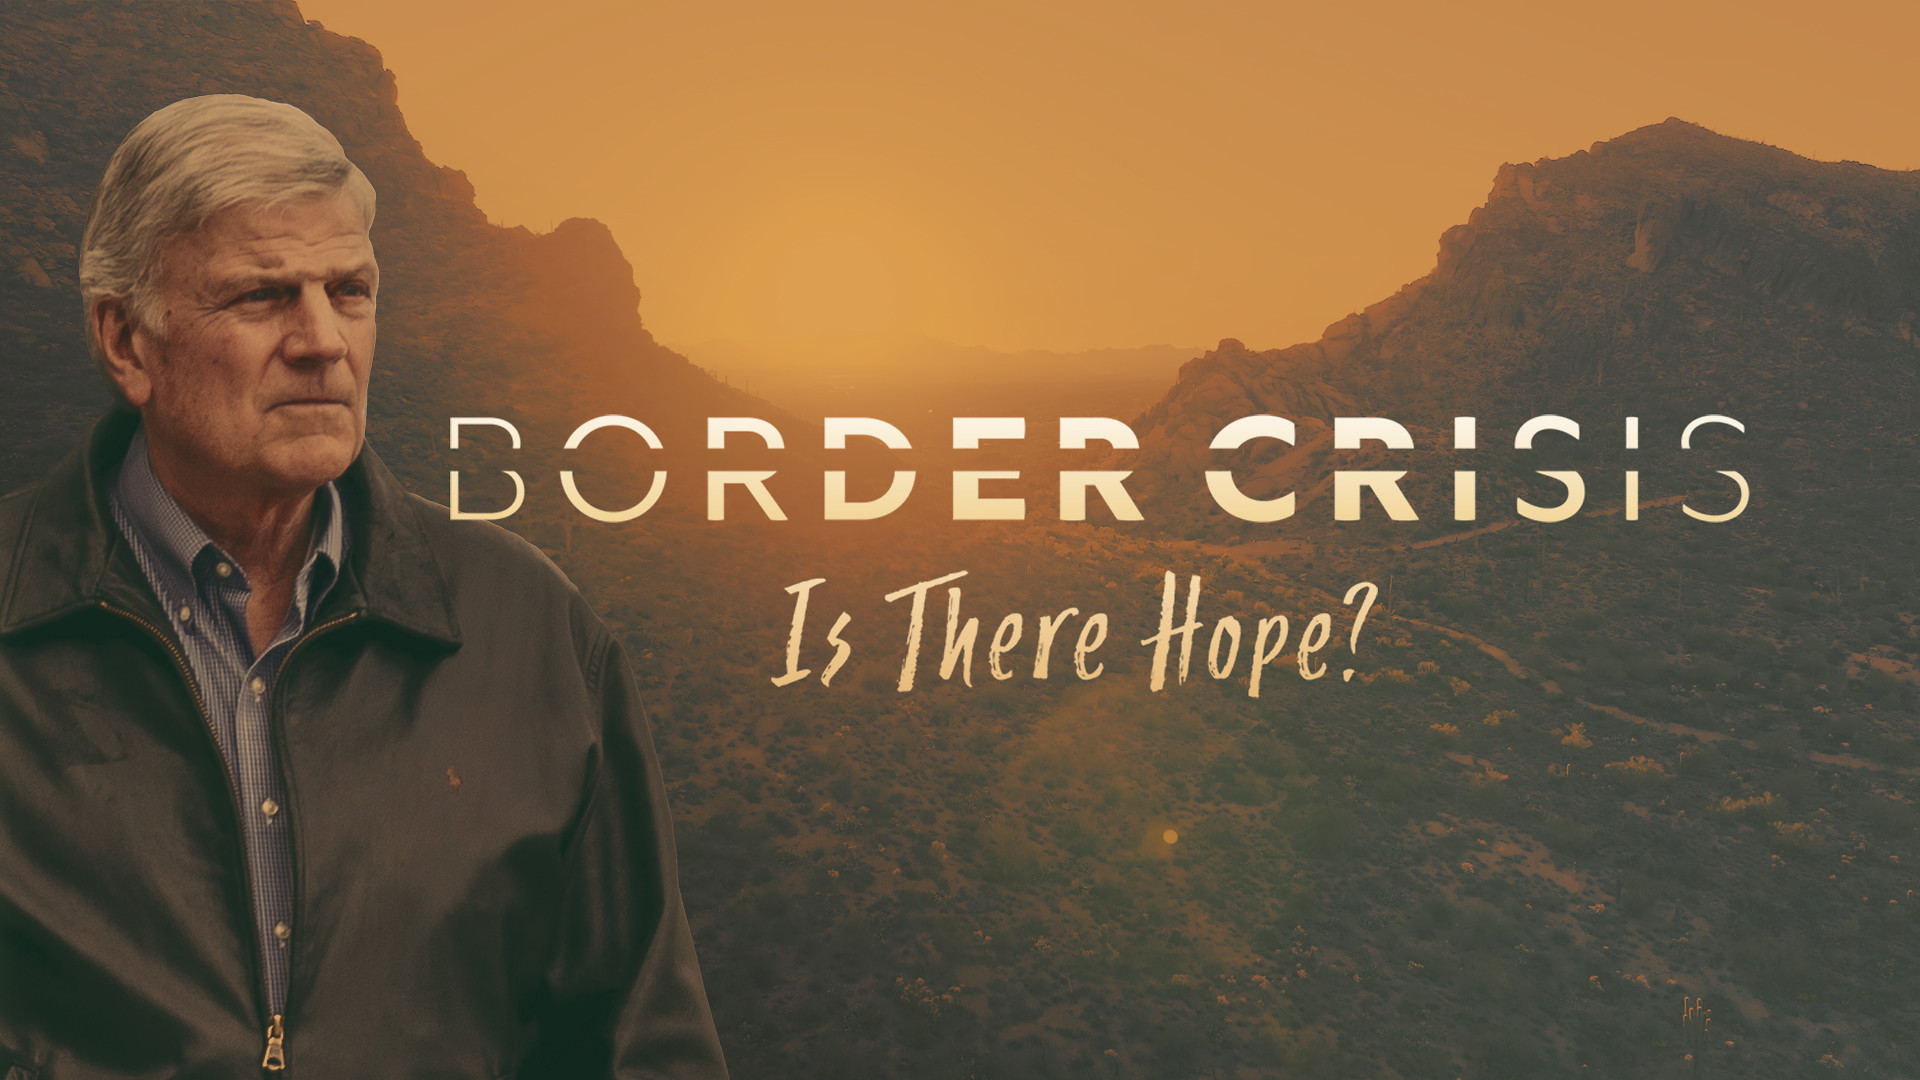 Border Crisis: Is There Hope?